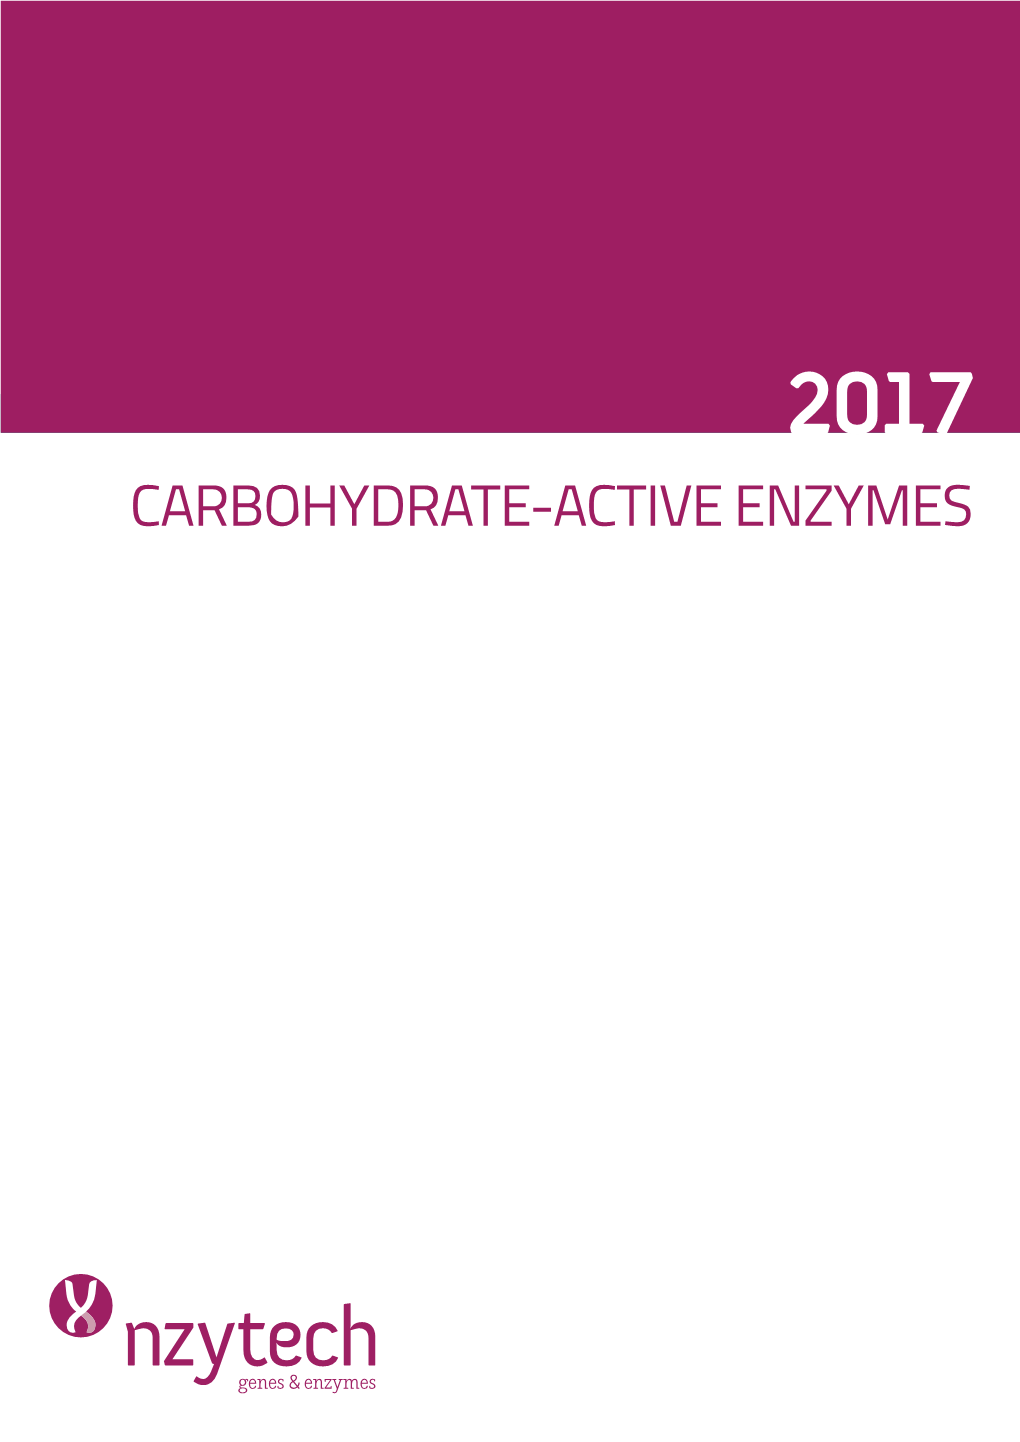 Carbohydrate-Active Enzymes